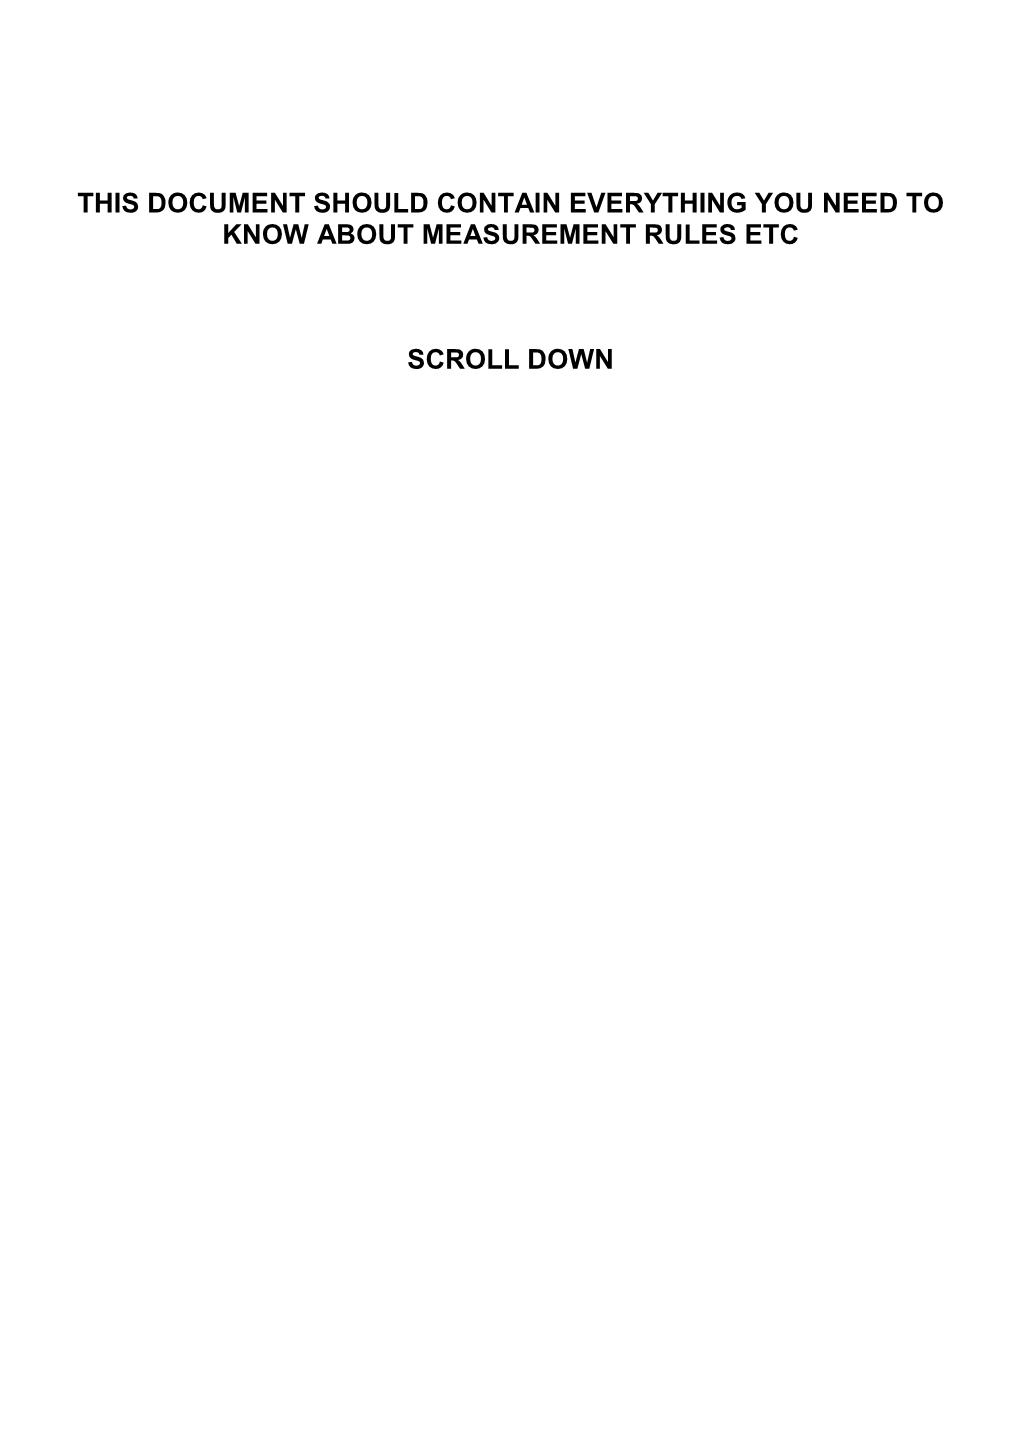 This Document Should Contain Everything You Need to Know About Measurement Rules Etc